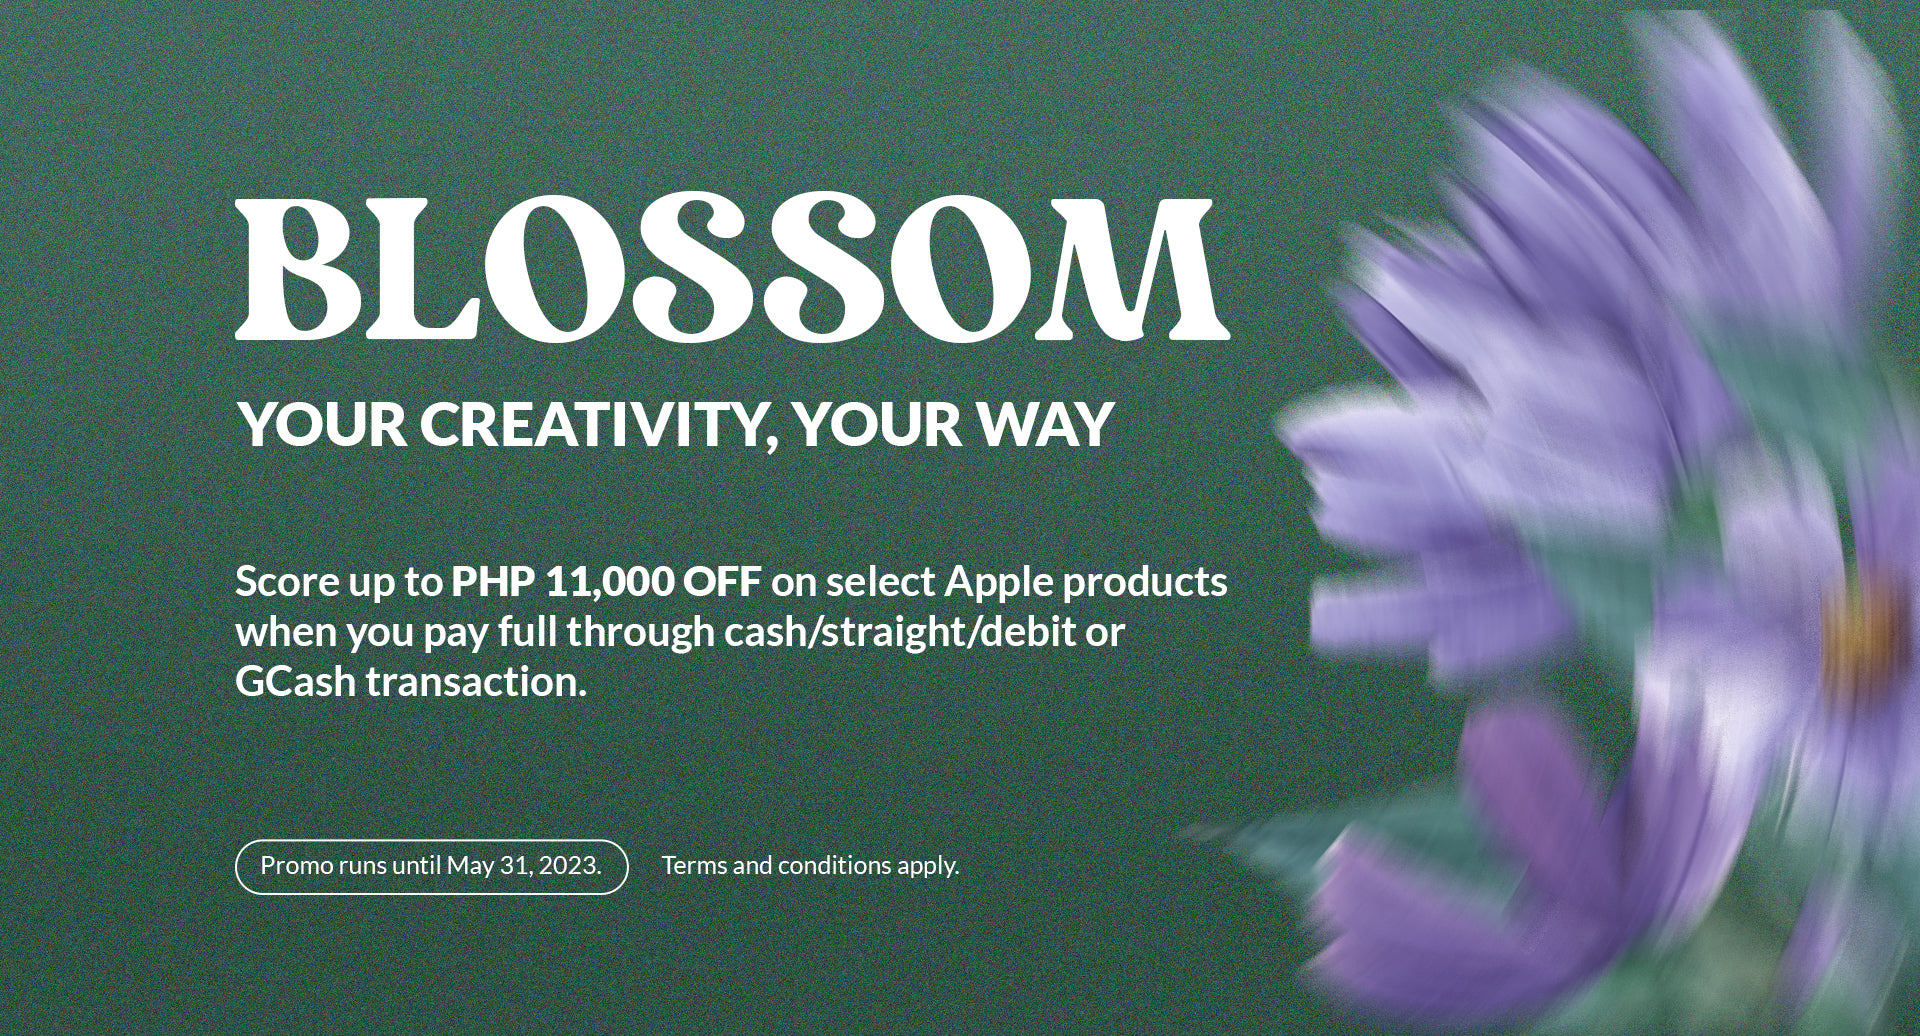 Blossom your creativity, your way! Score up to PHP11,000 off on select Apple products.